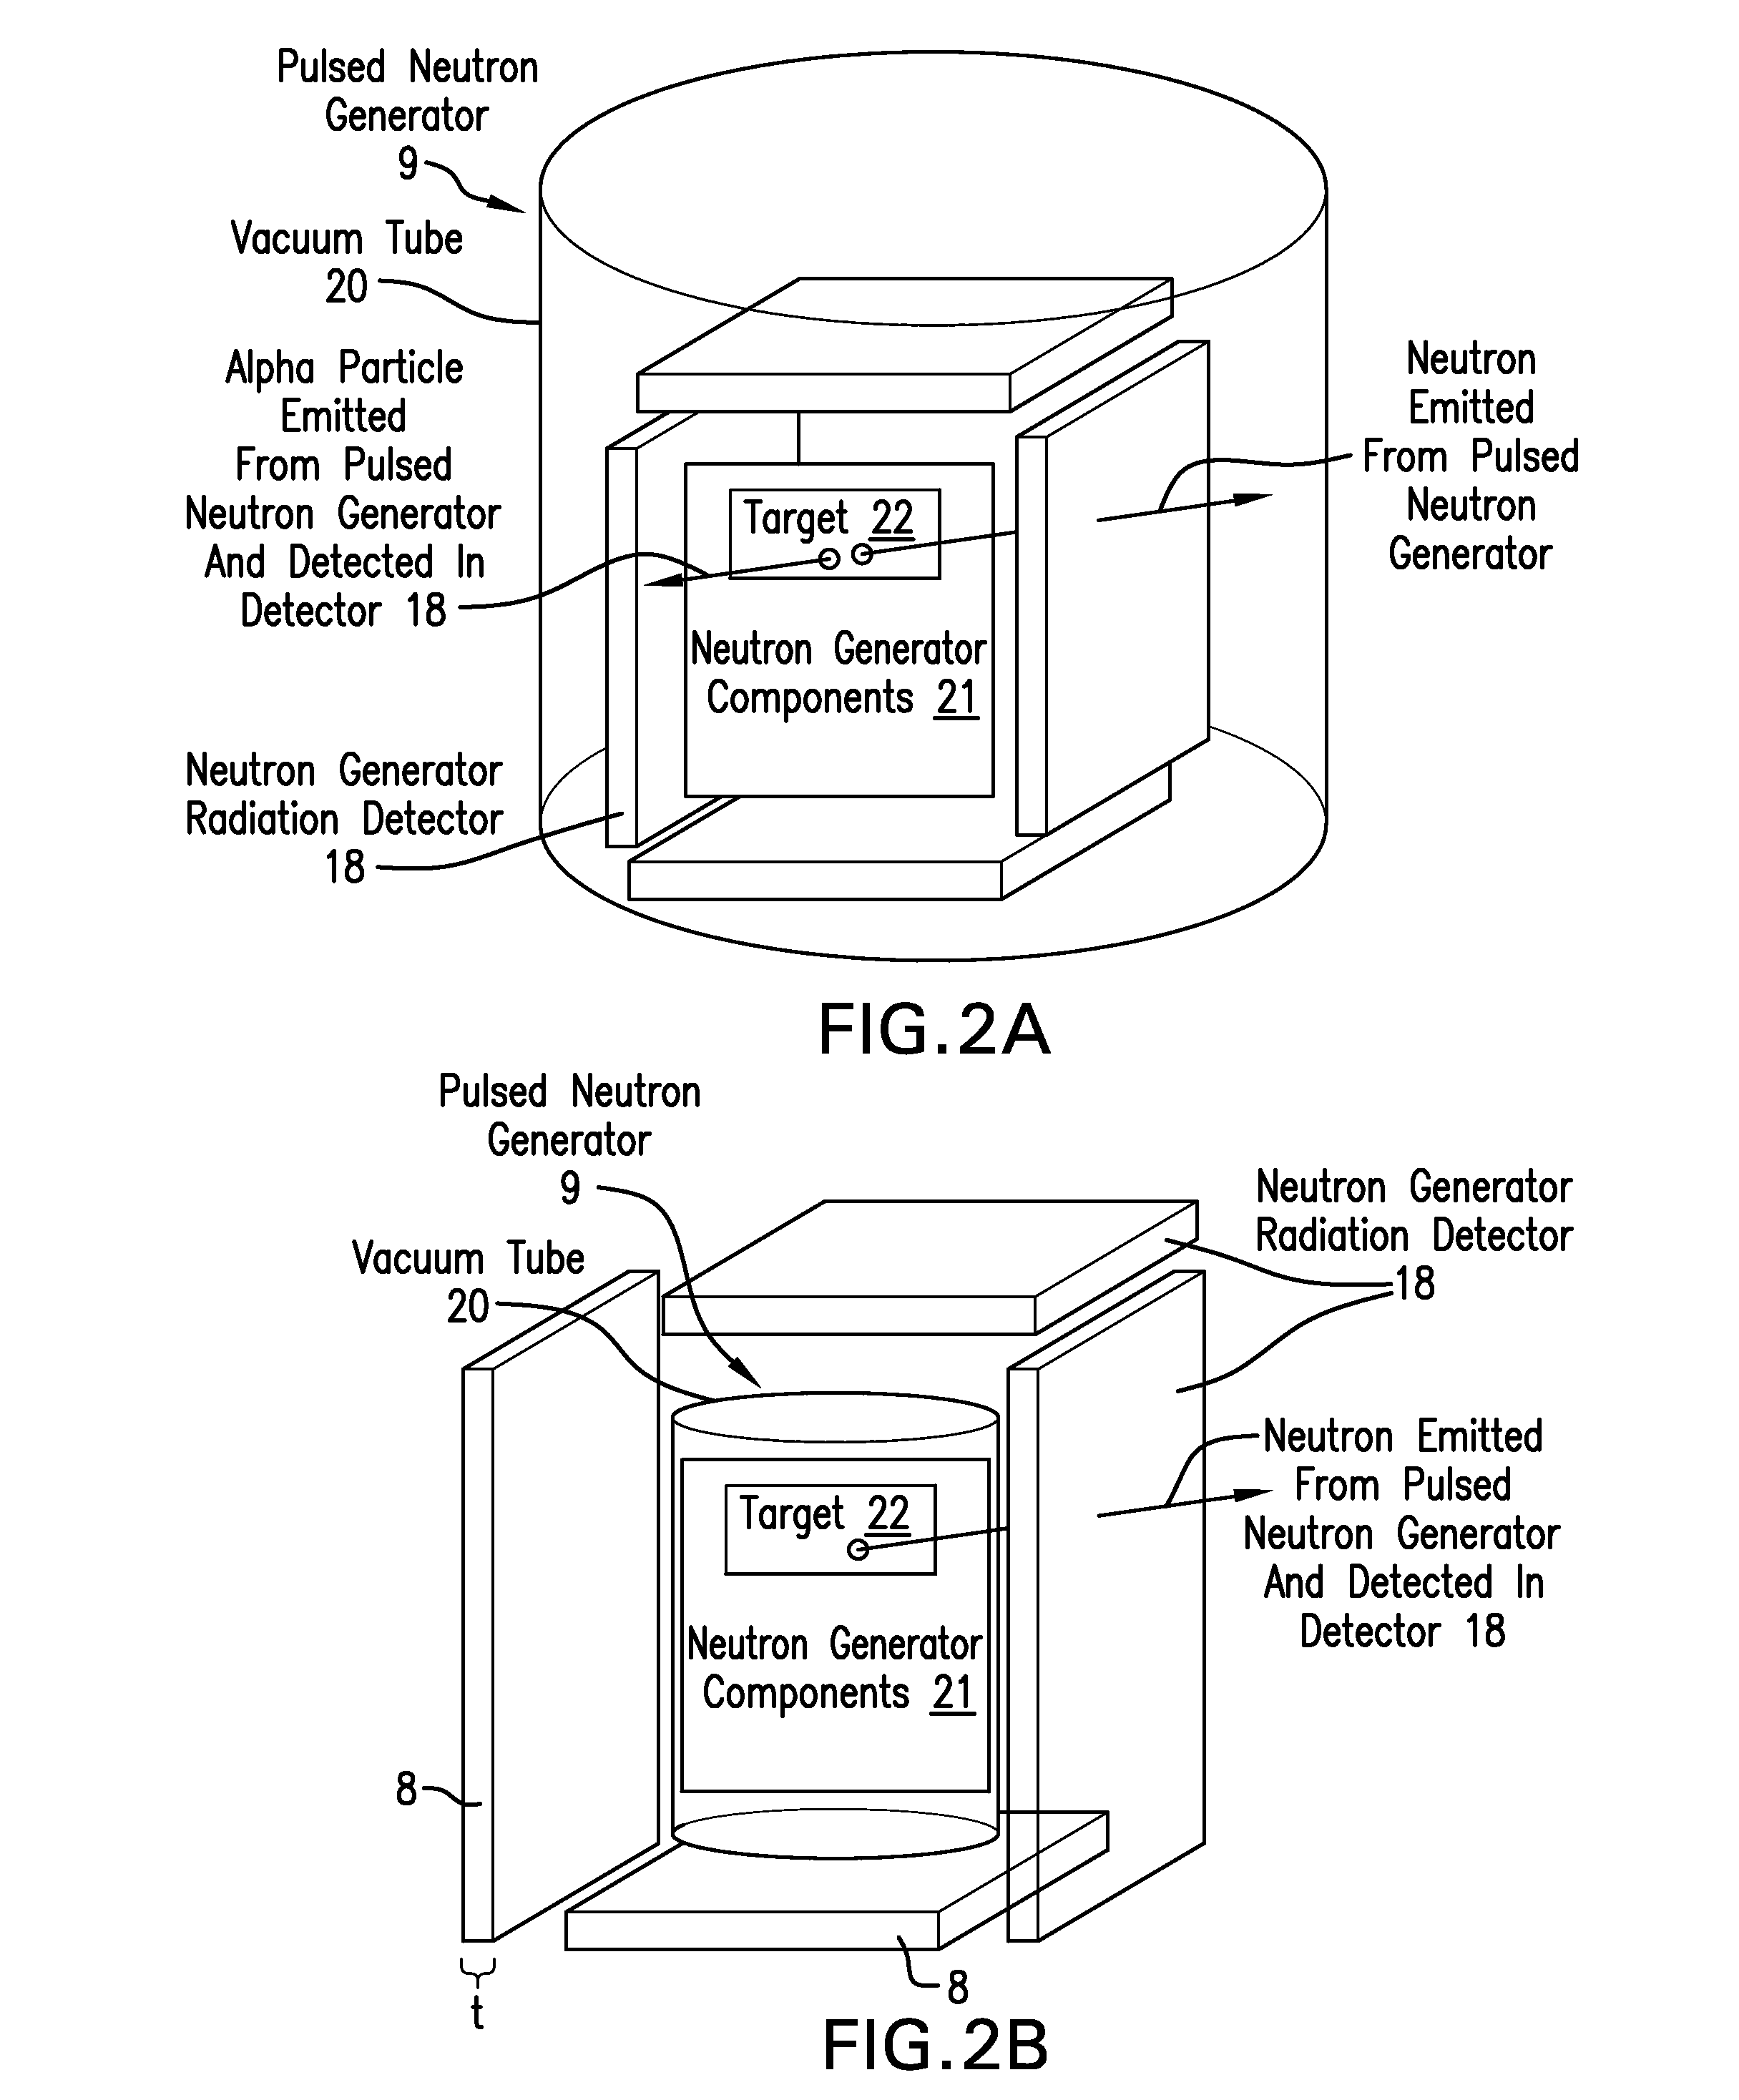 Measurement technique utilizing novel radiation detectors in and near pulsed neutron generator tubes for well logging applications using solid state materials